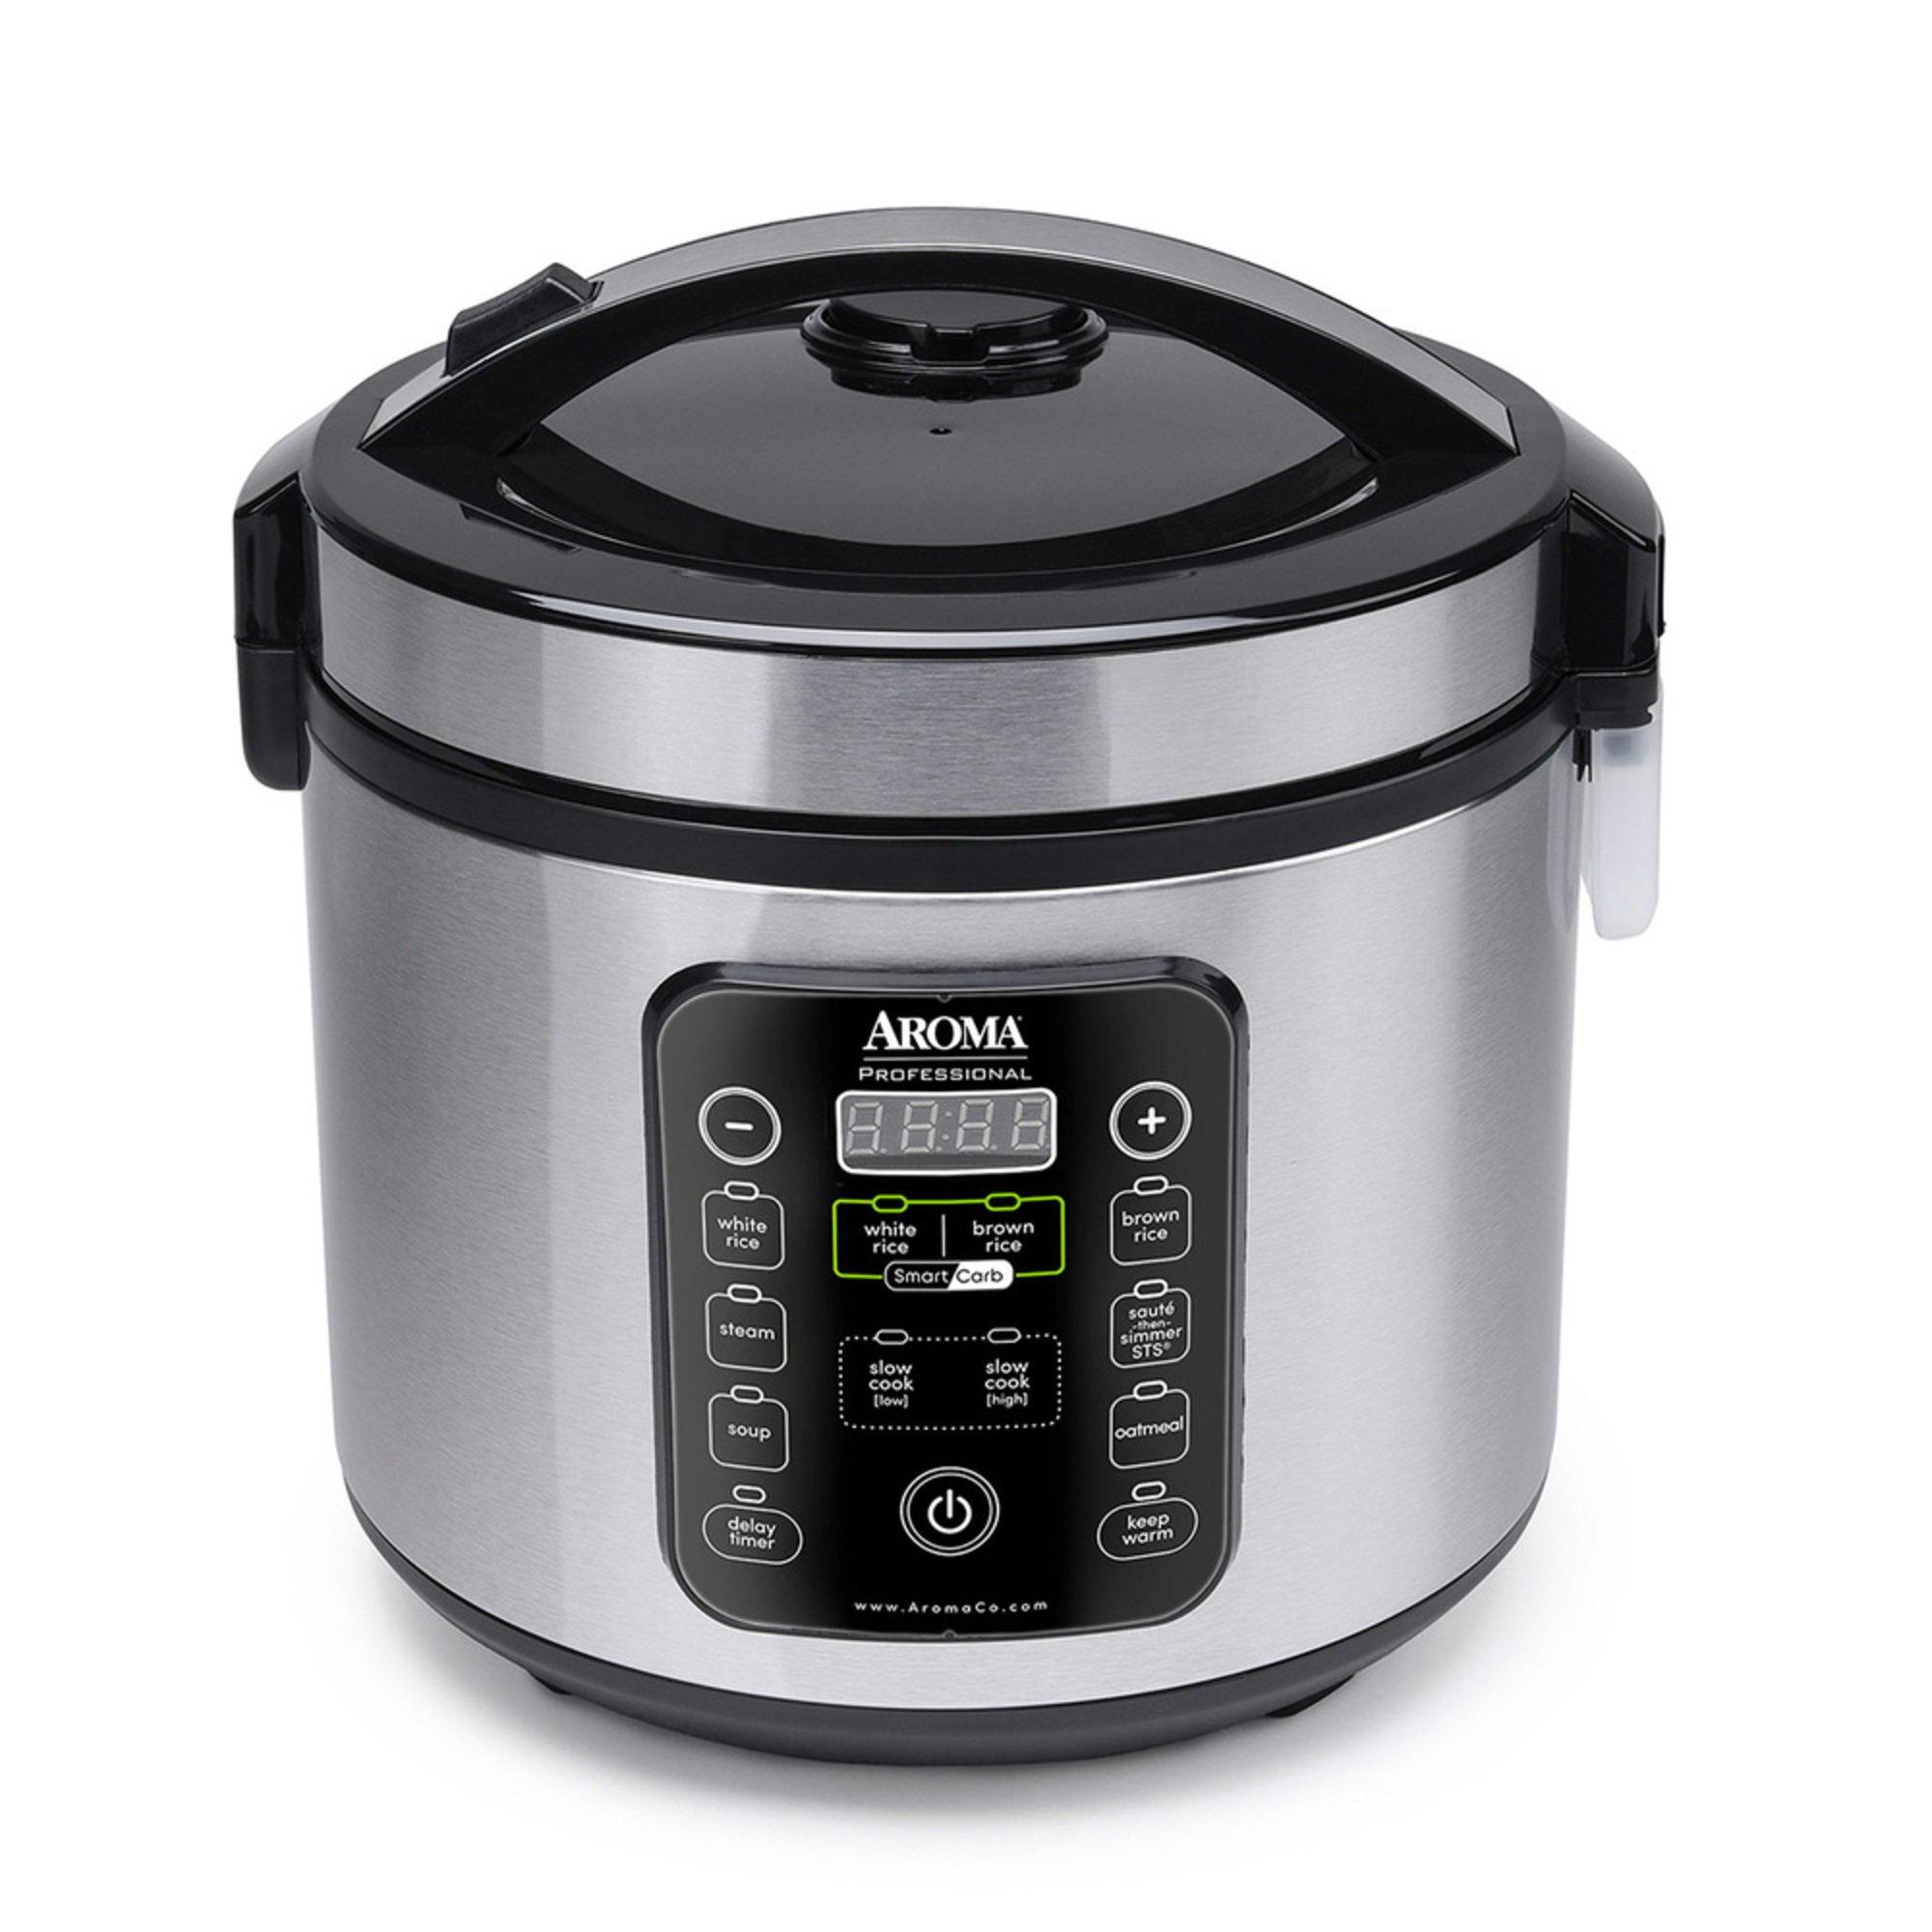 Aroma 20-cup Smart Carb Rice Cooker | Rice Cookers, Pressure Cookers ...